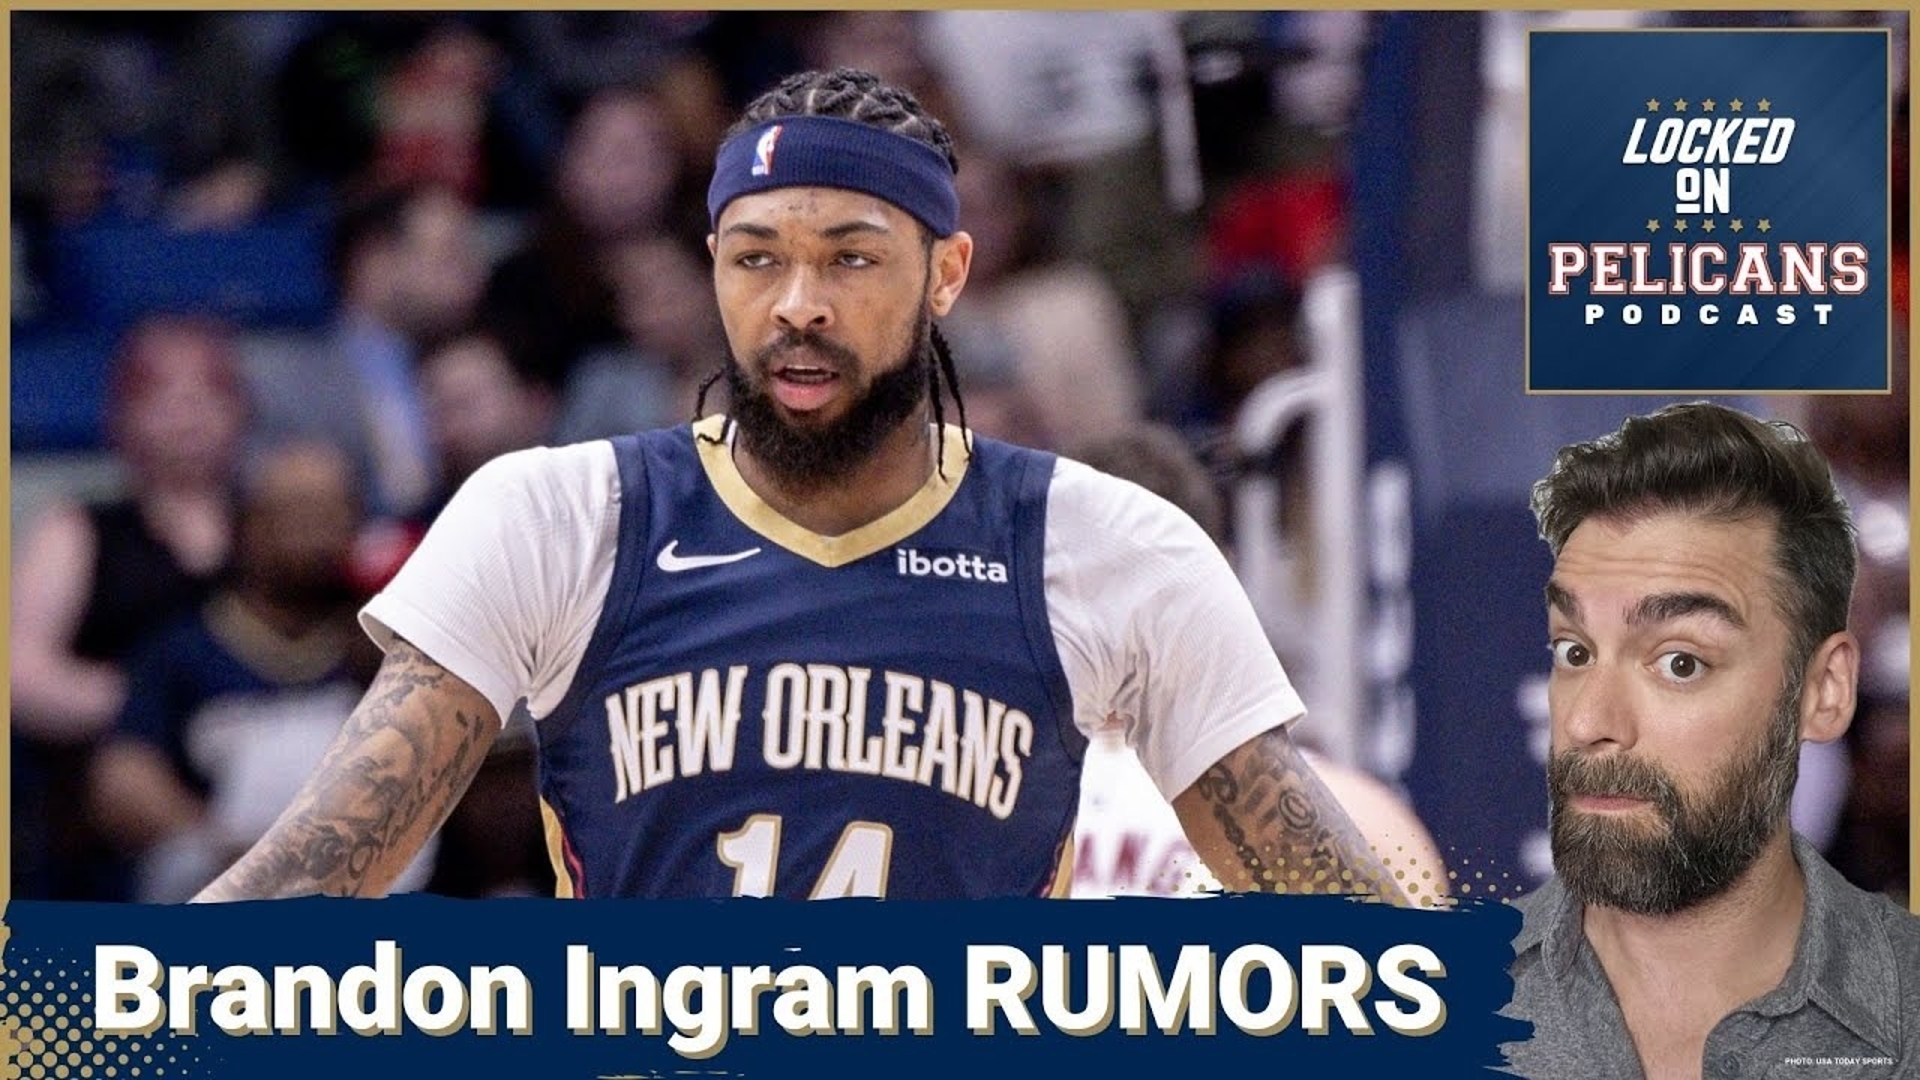 There are new rumors floating around that the New Orleans Pelicans will not offer Brandon Ingram a contract extension.